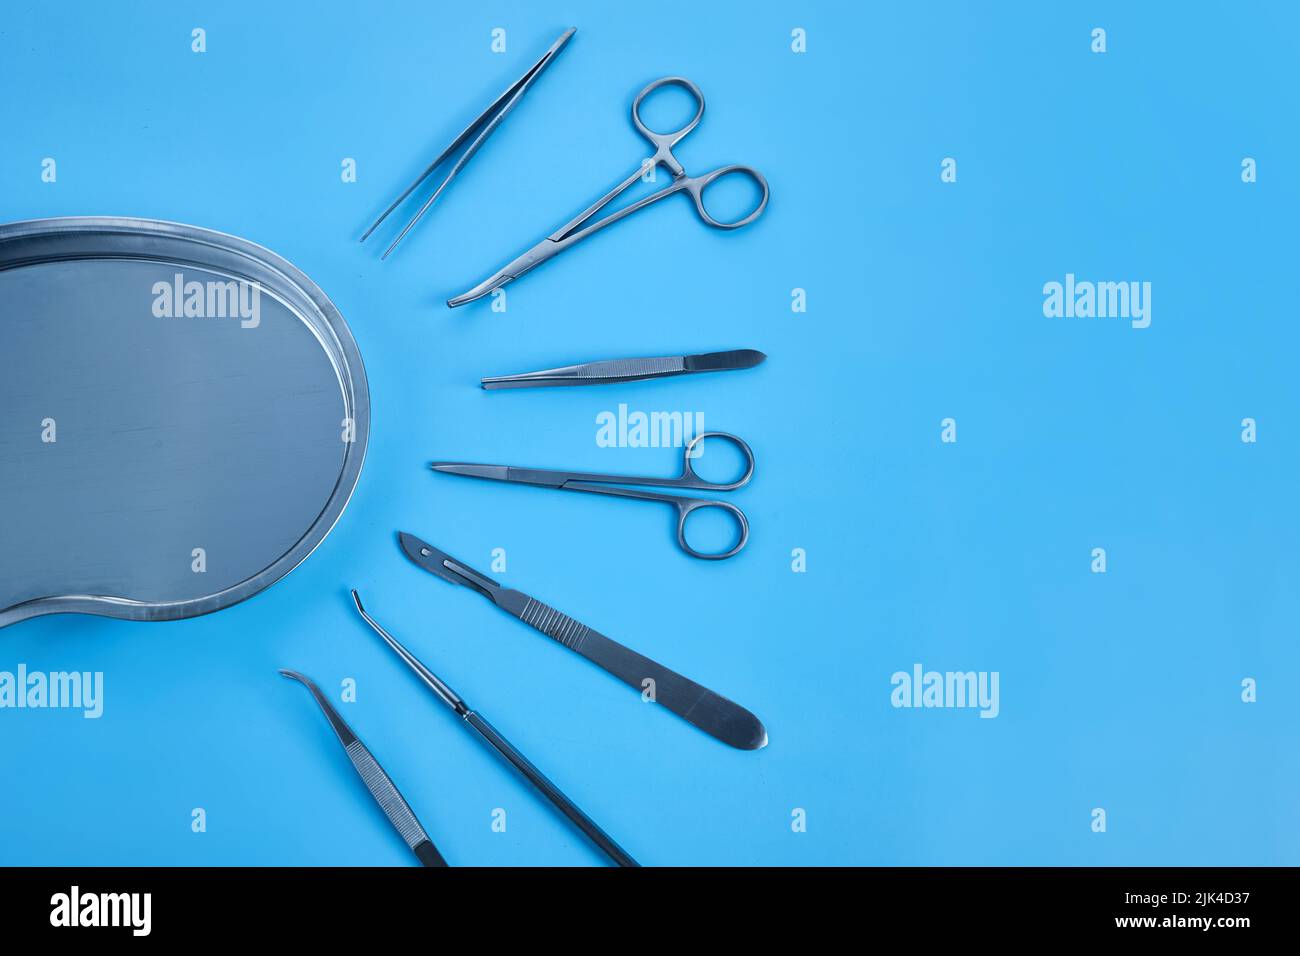 surgical equipment at surgery desk. Medical tools such scissors, scalpel. Stock Photo